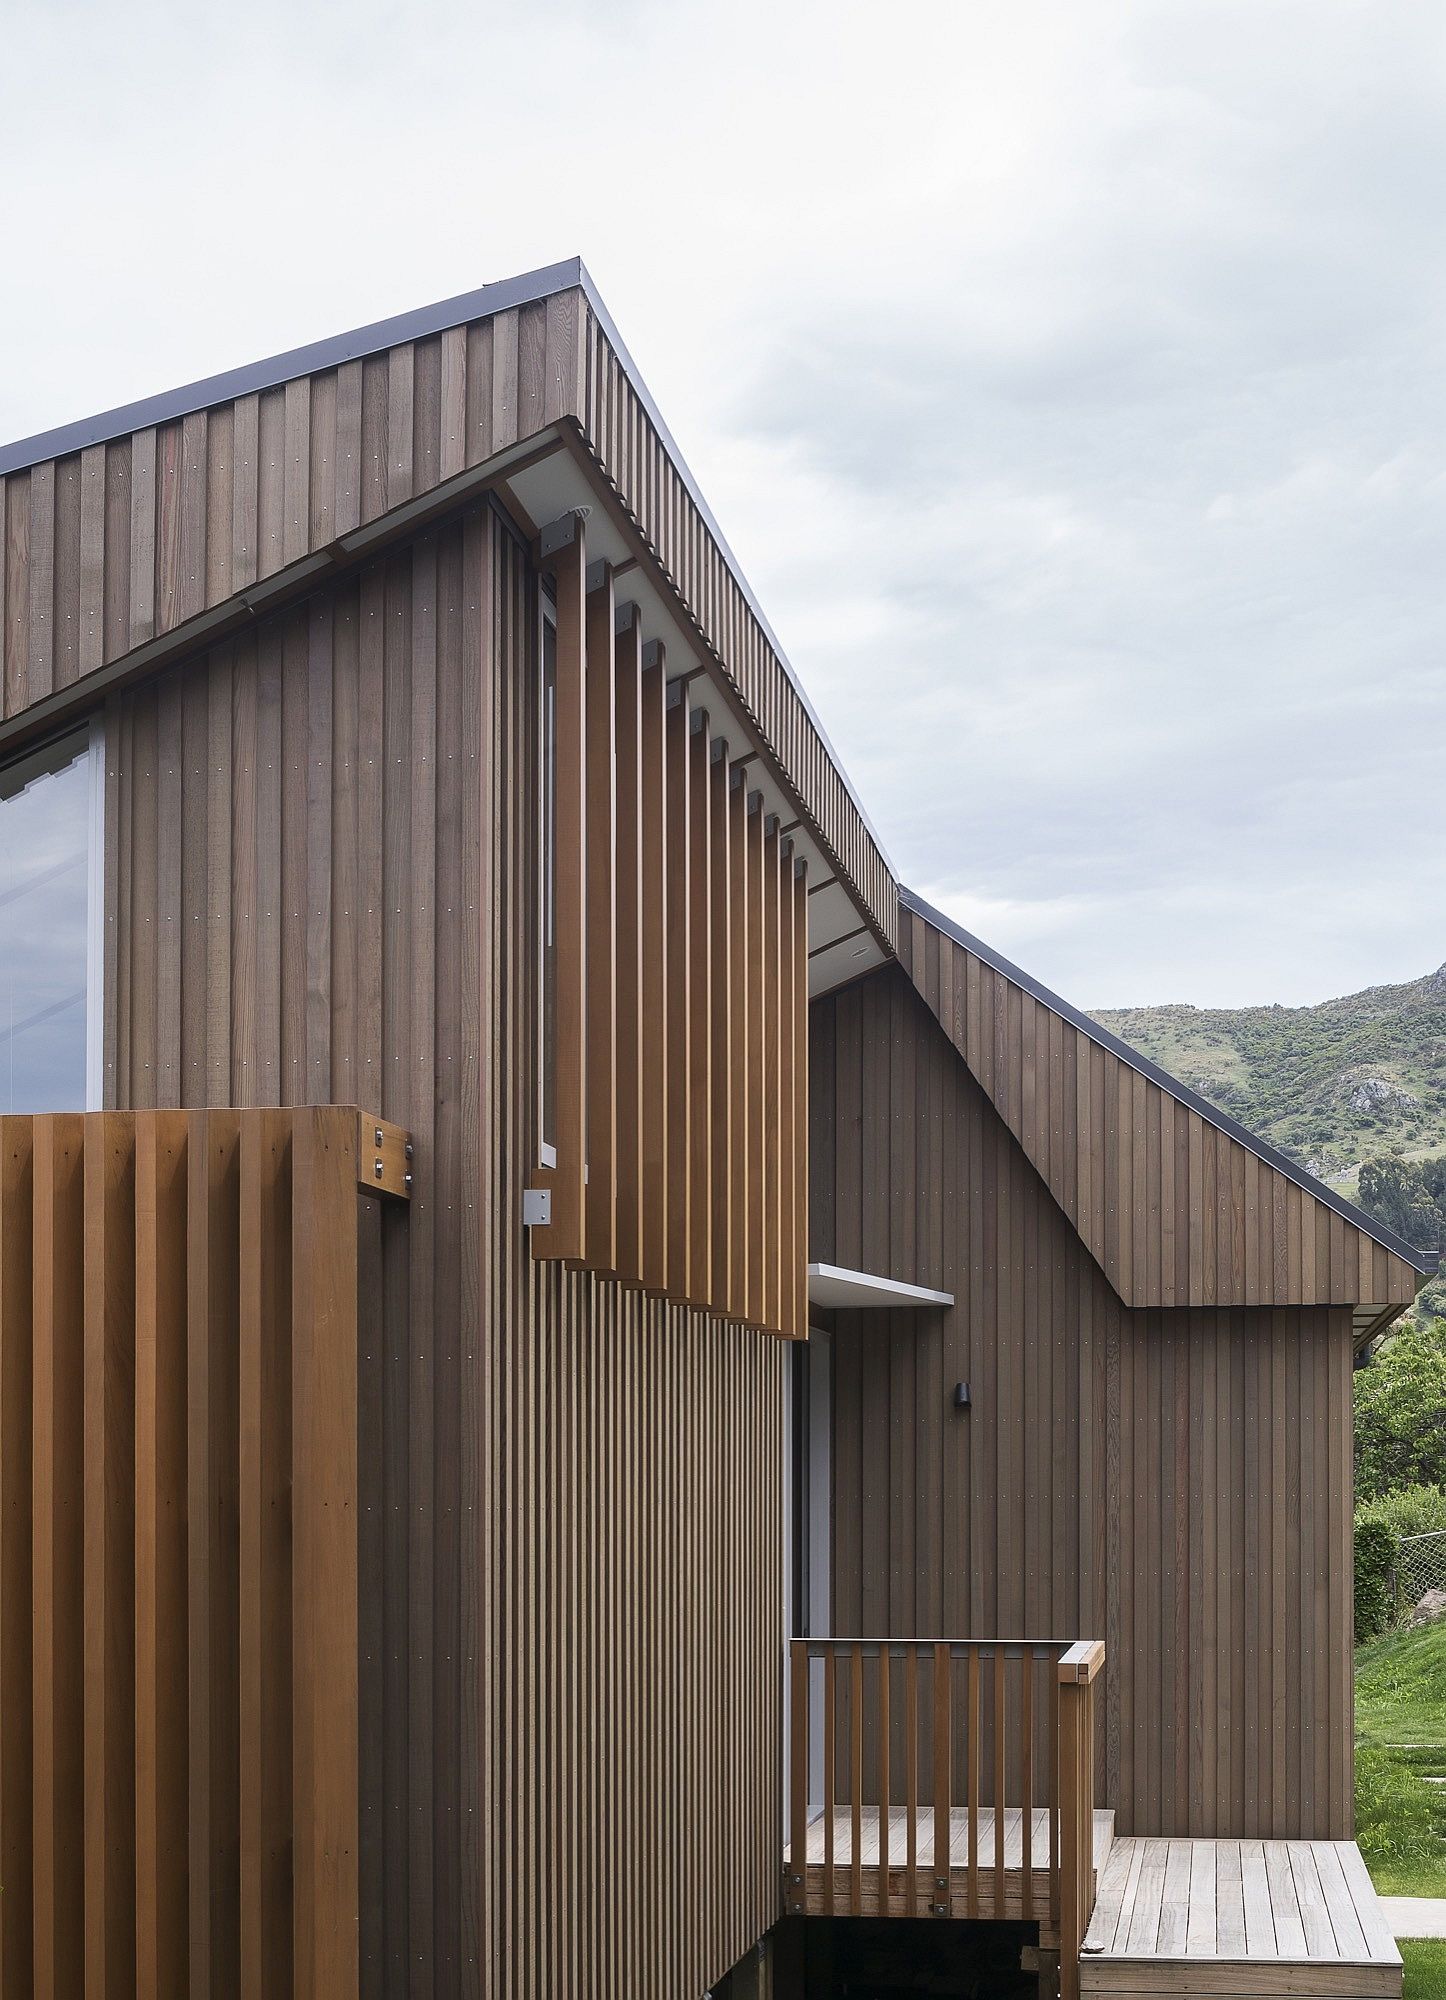 External timber frame of the home in New Zealand